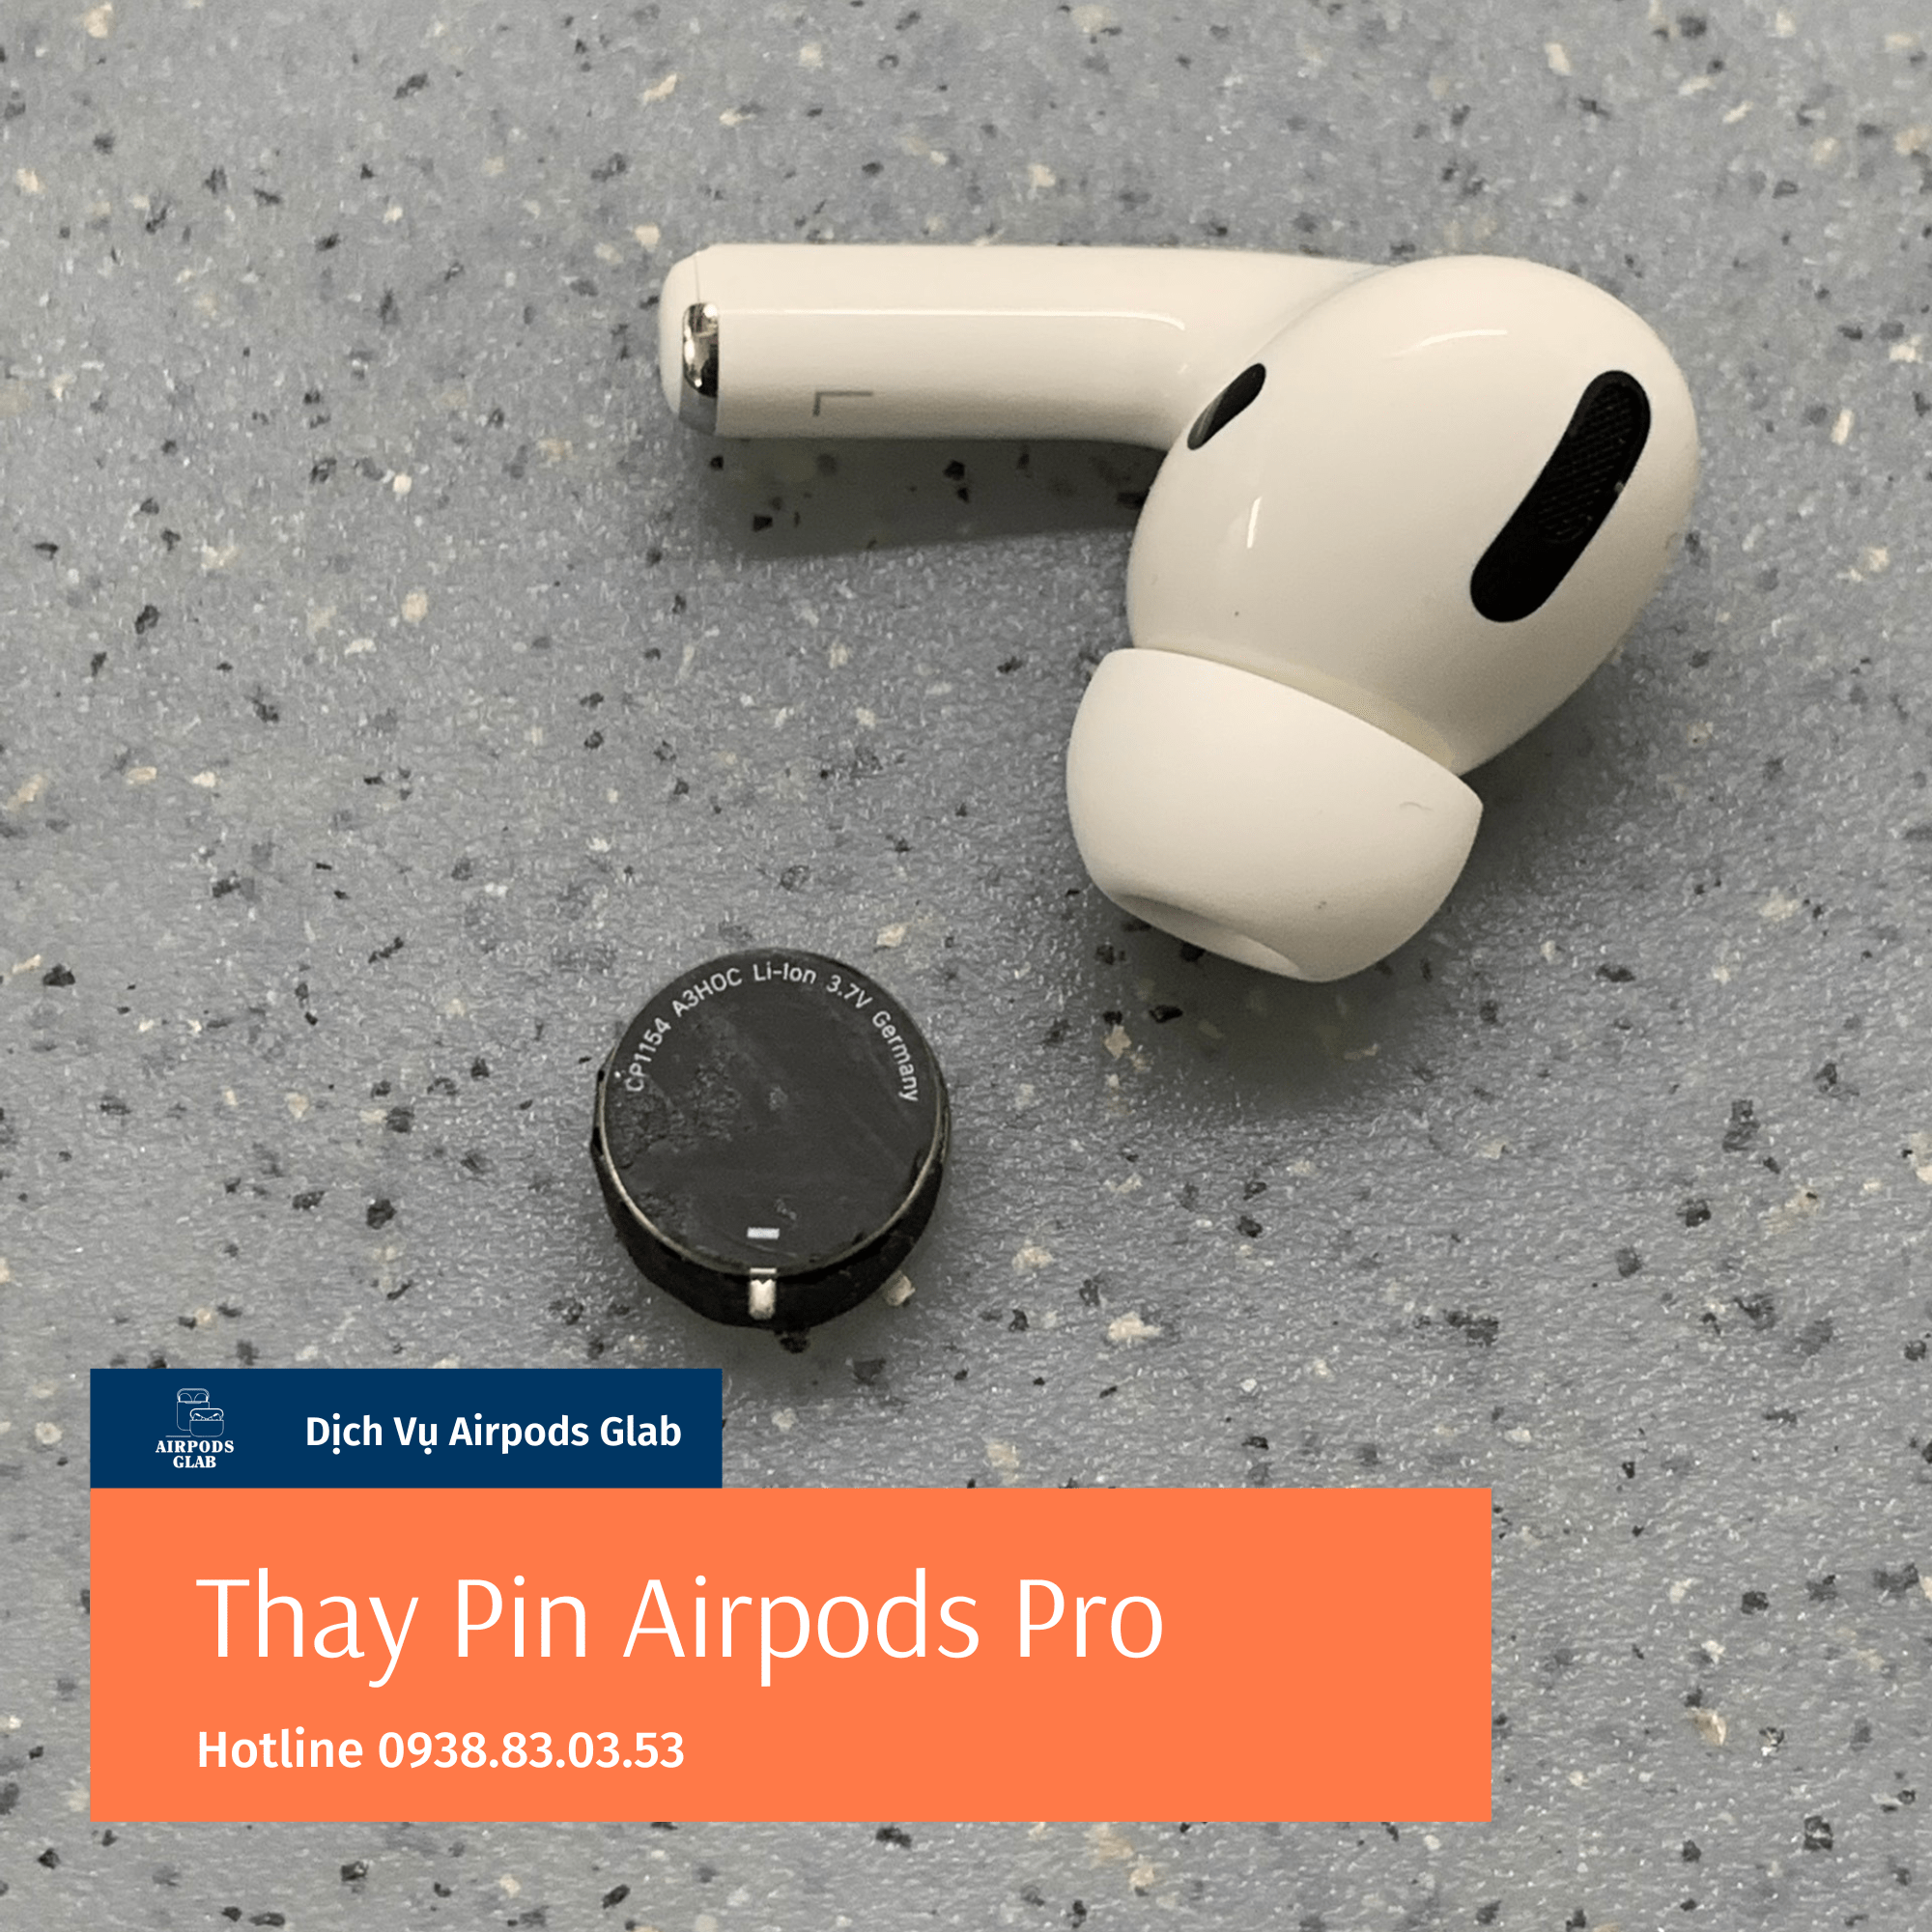 thay-pin-airpods-pro 